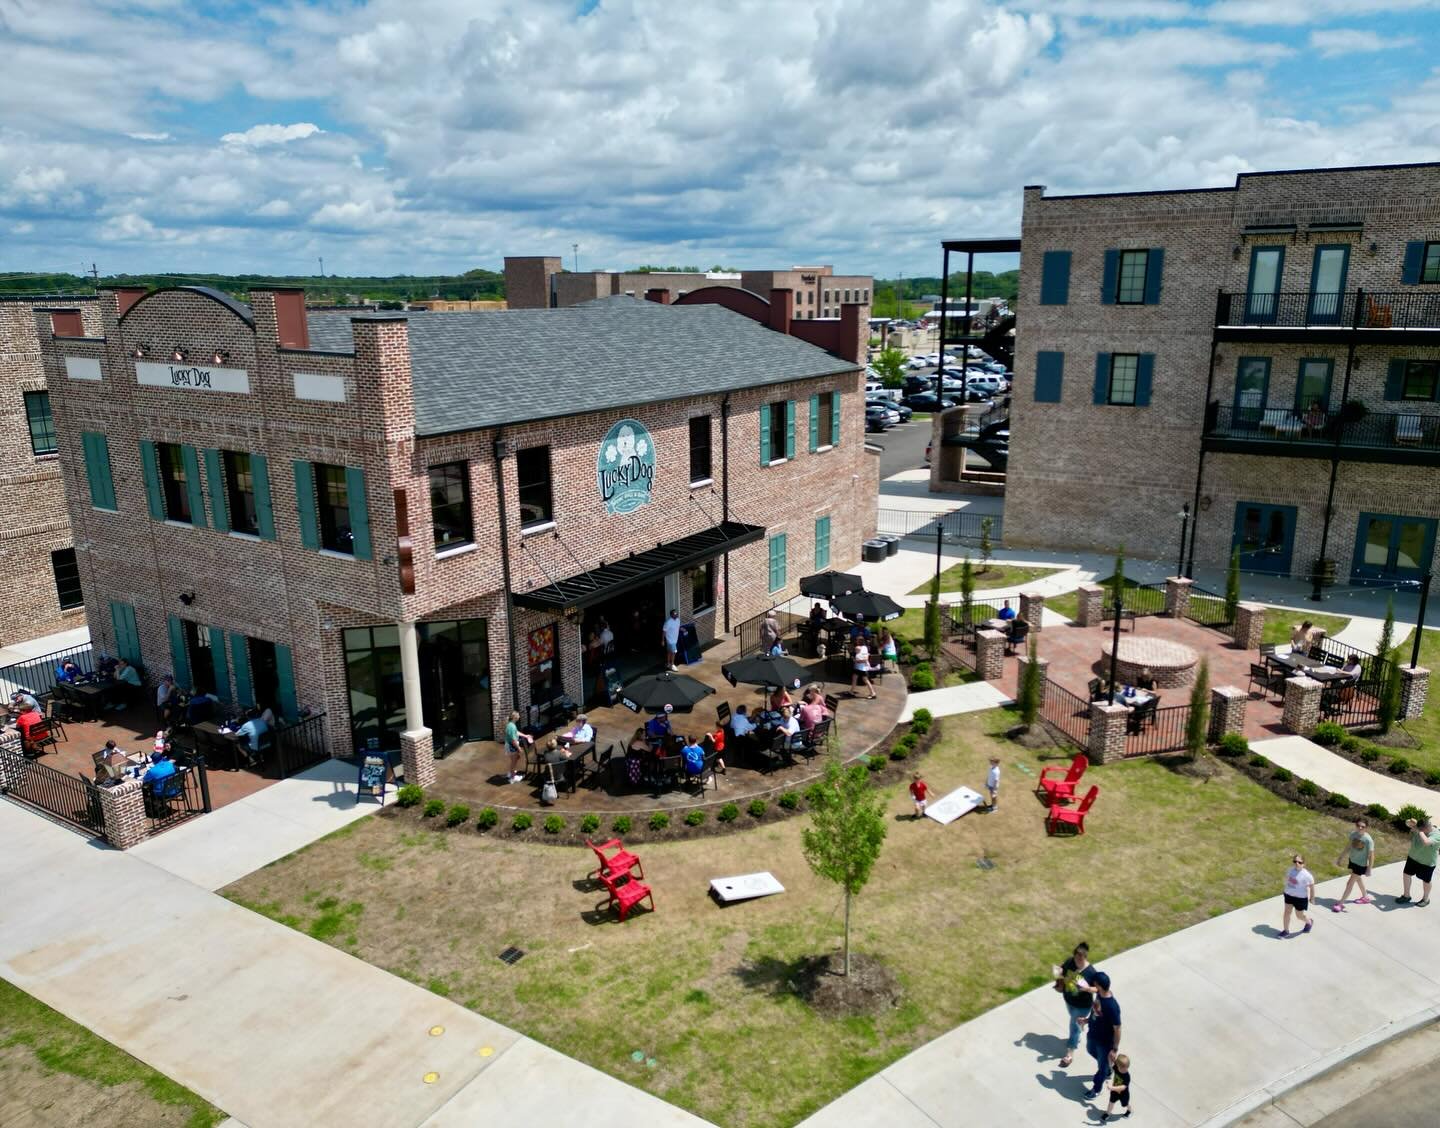 There&rsquo;s no shortage of outdoor dining at Silo Square &amp; lucky for you, it&rsquo;s the perfect weekend for it! ☀️ What&rsquo;s your go-to dining spot in Silo Square? Comment below to let us know! ⬇️

&bull; @luckydogsilosquare 
&bull; @vp.sil